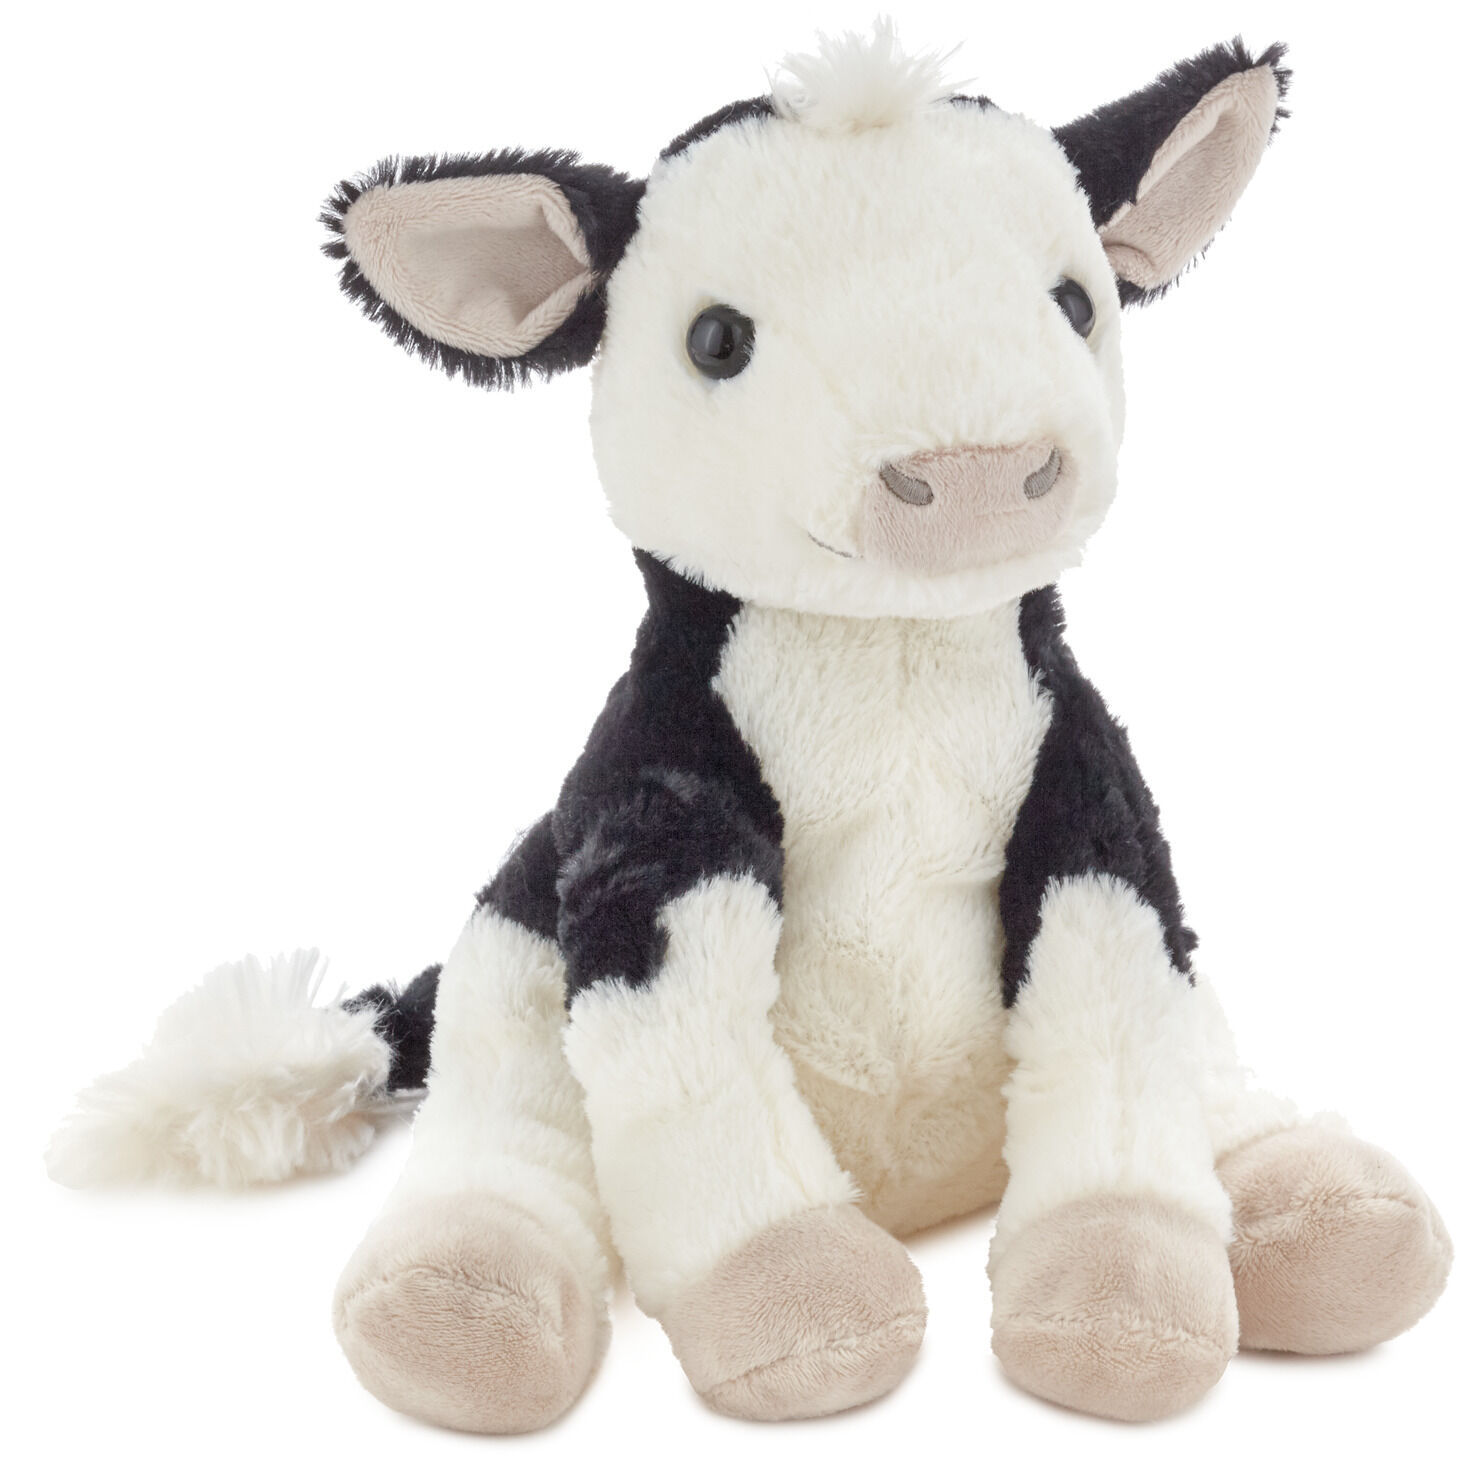 Baby Cow Stuffed Animal, 8.25" for only USD 18.99 | Hallmark